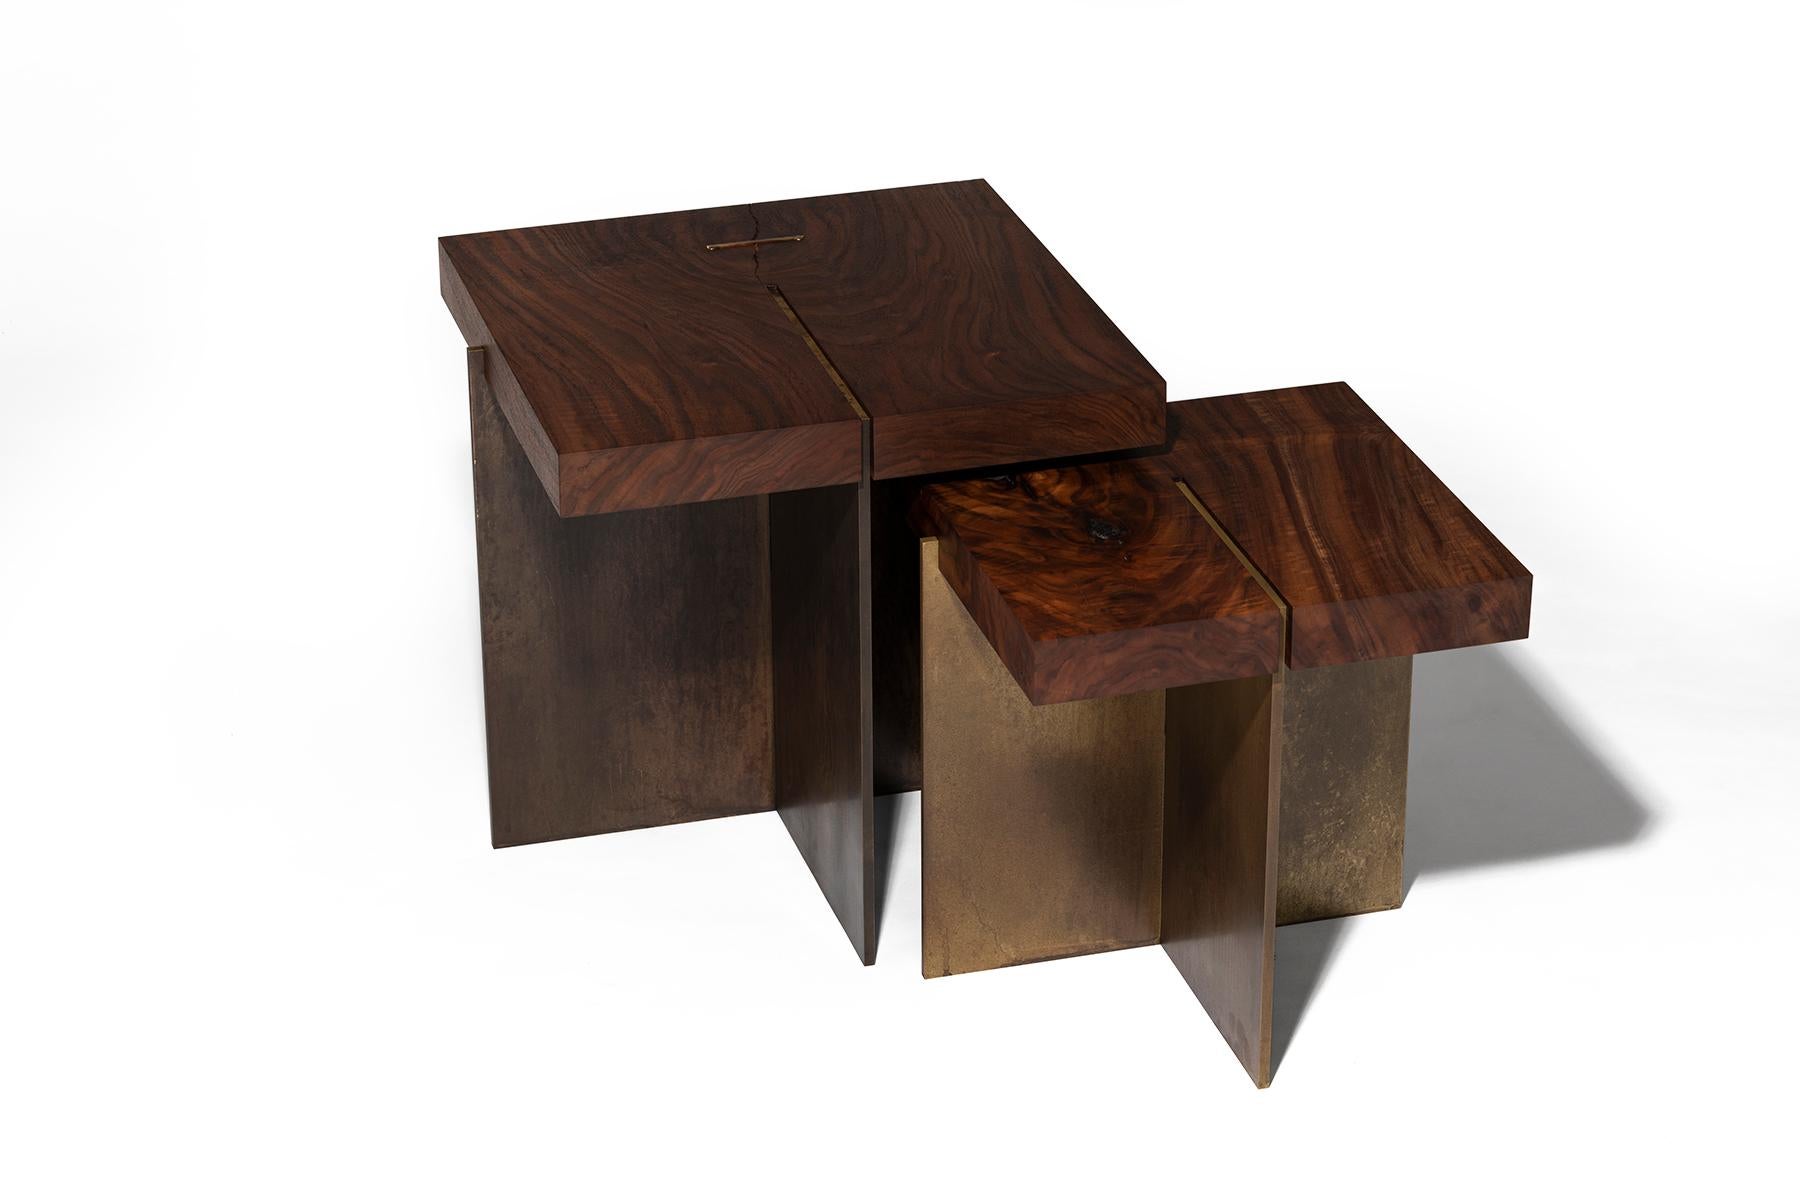 These simple yet handsome Cartesian nesting tables by Taylor Donsker feature an interlocking solid Walnut and hand aged solid brass base. Available in different sizes and materials, customizable. Measure: Shown in large (20